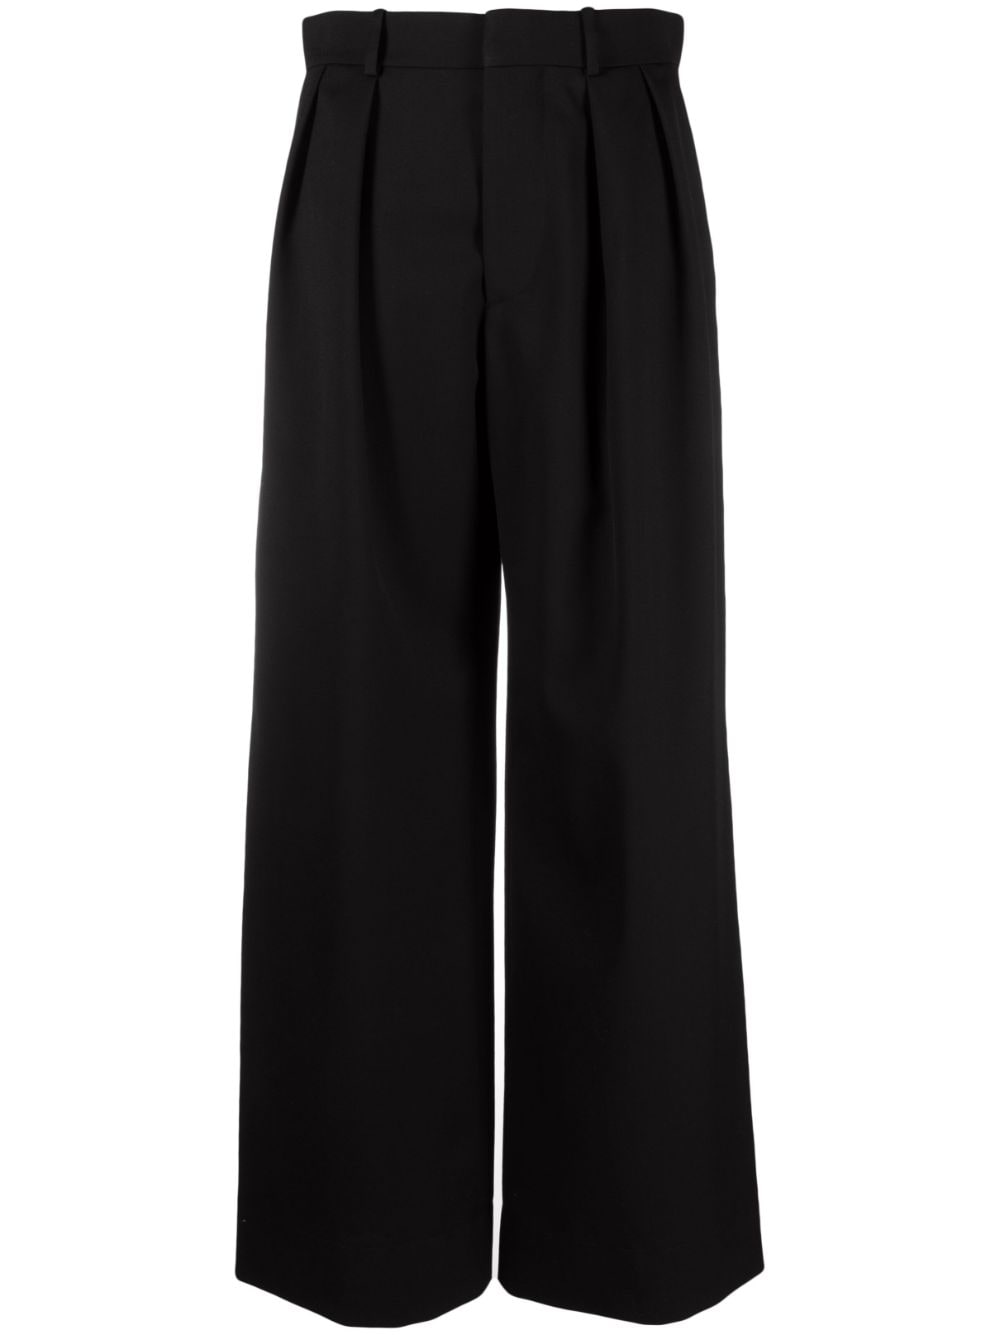 Wardrobe.nyc Low Rise Plated Pant In Black